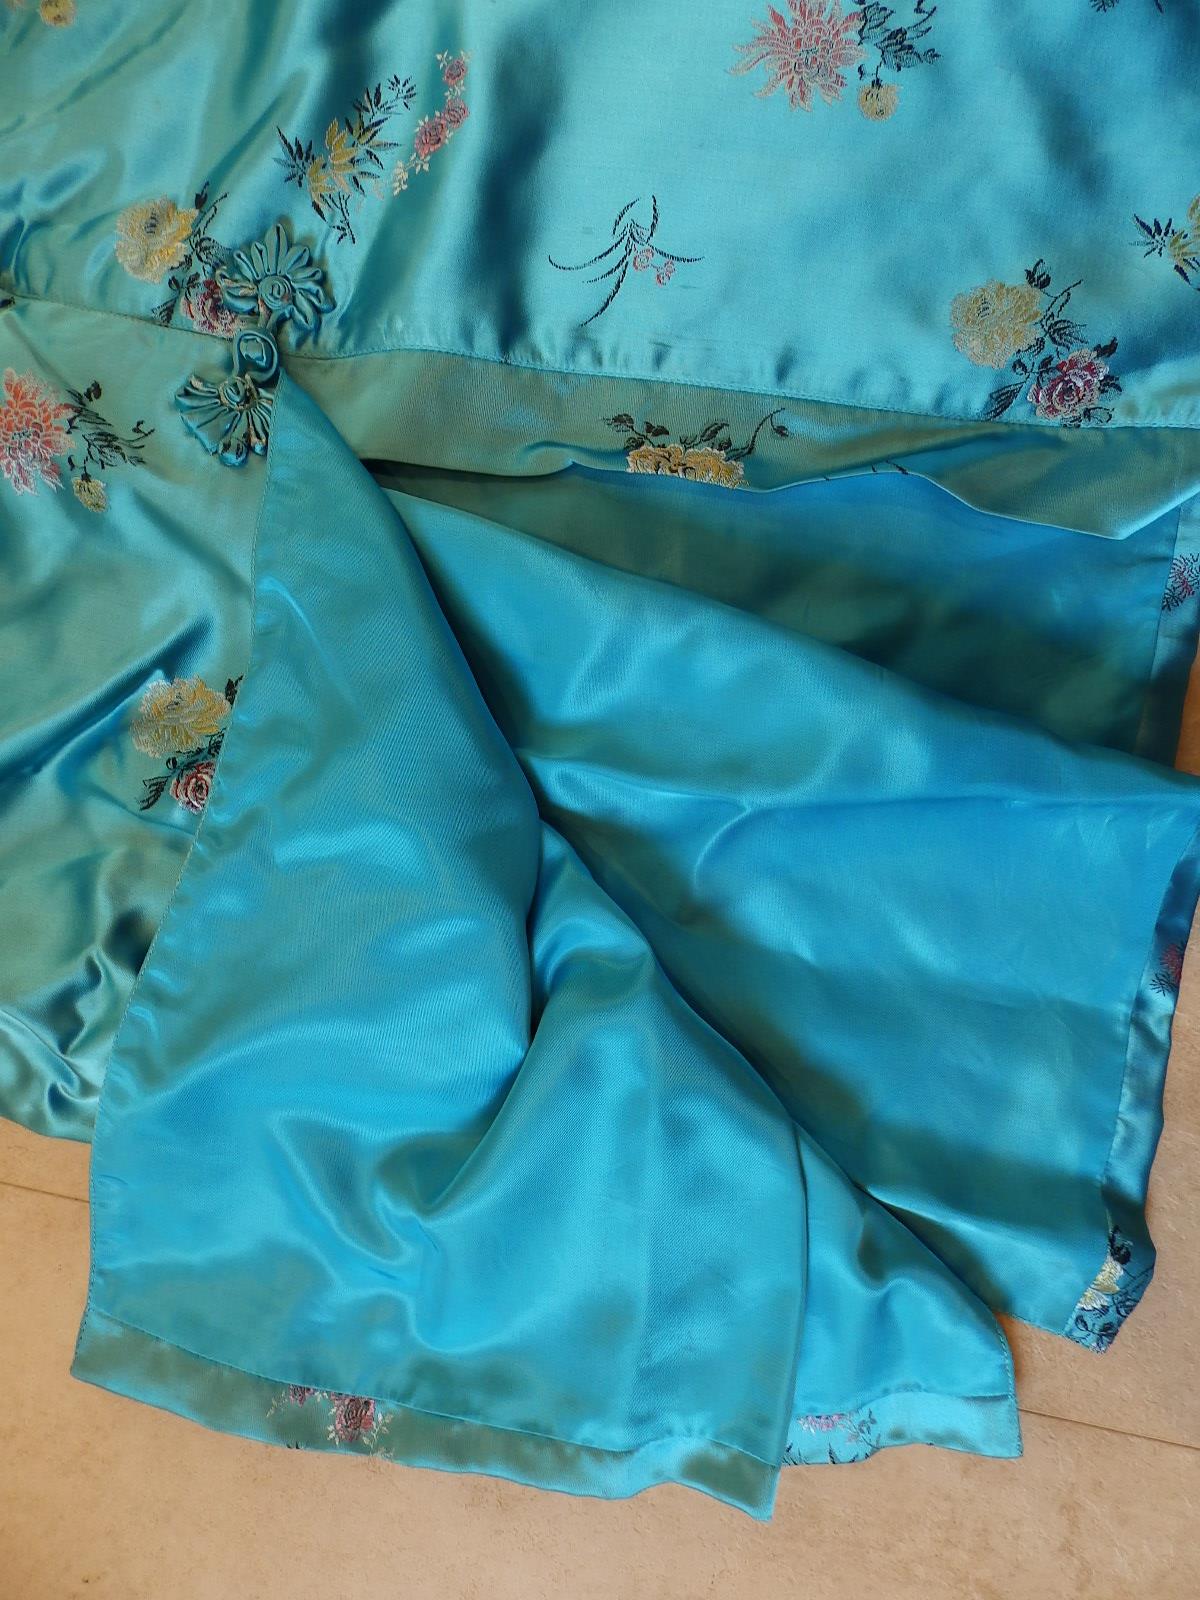 A mid 20thC Chinese silk satin turquoise brocade jacket. - Image 5 of 7